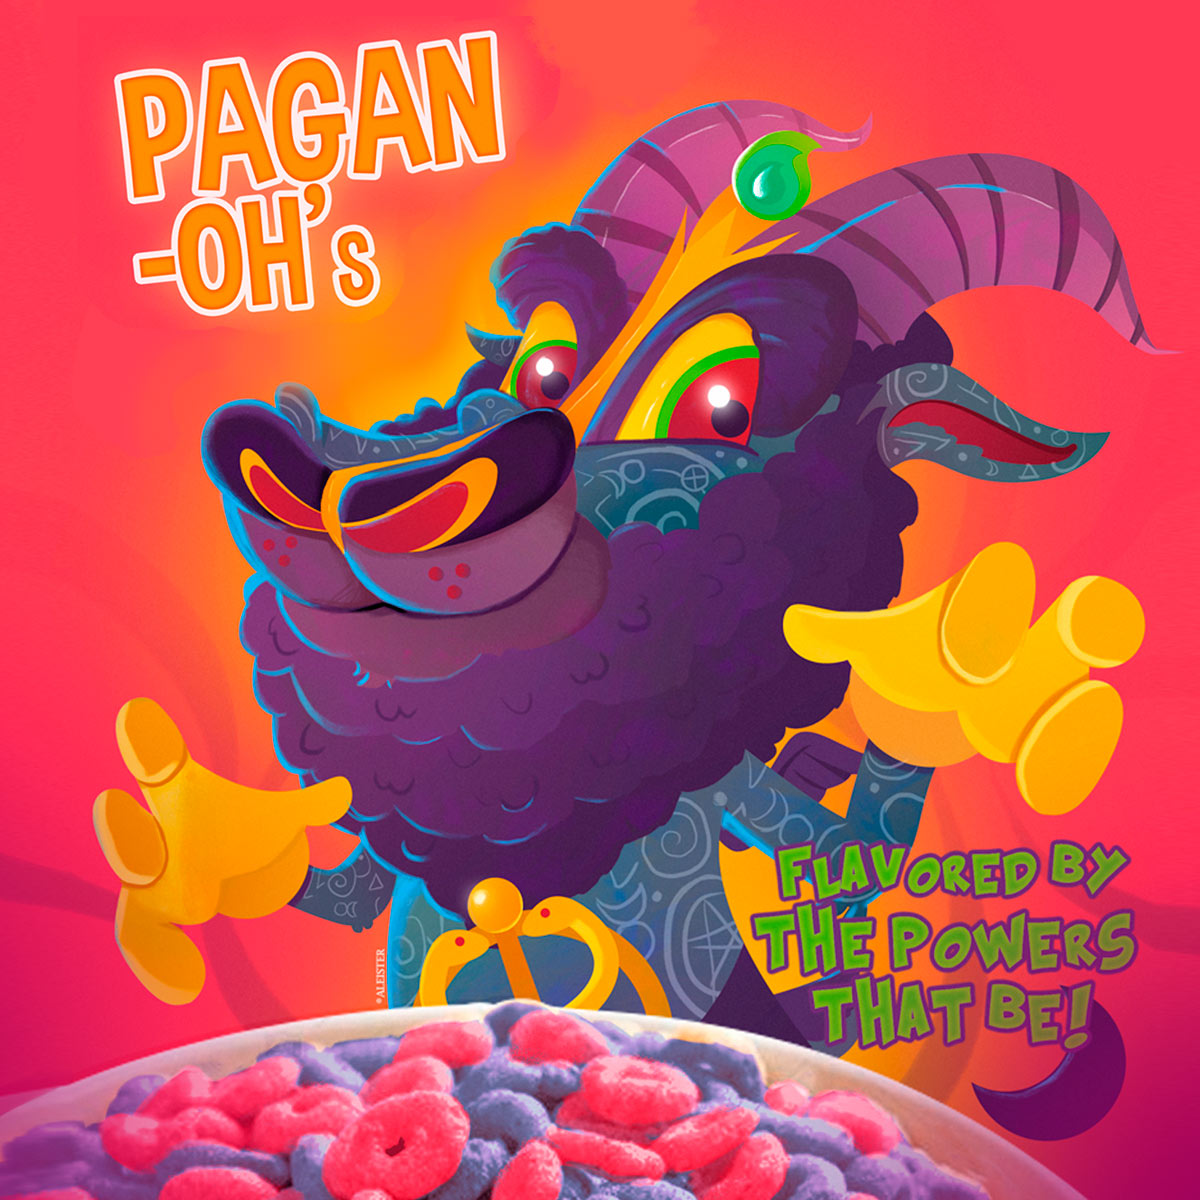 Pagan-oh´s Cereal